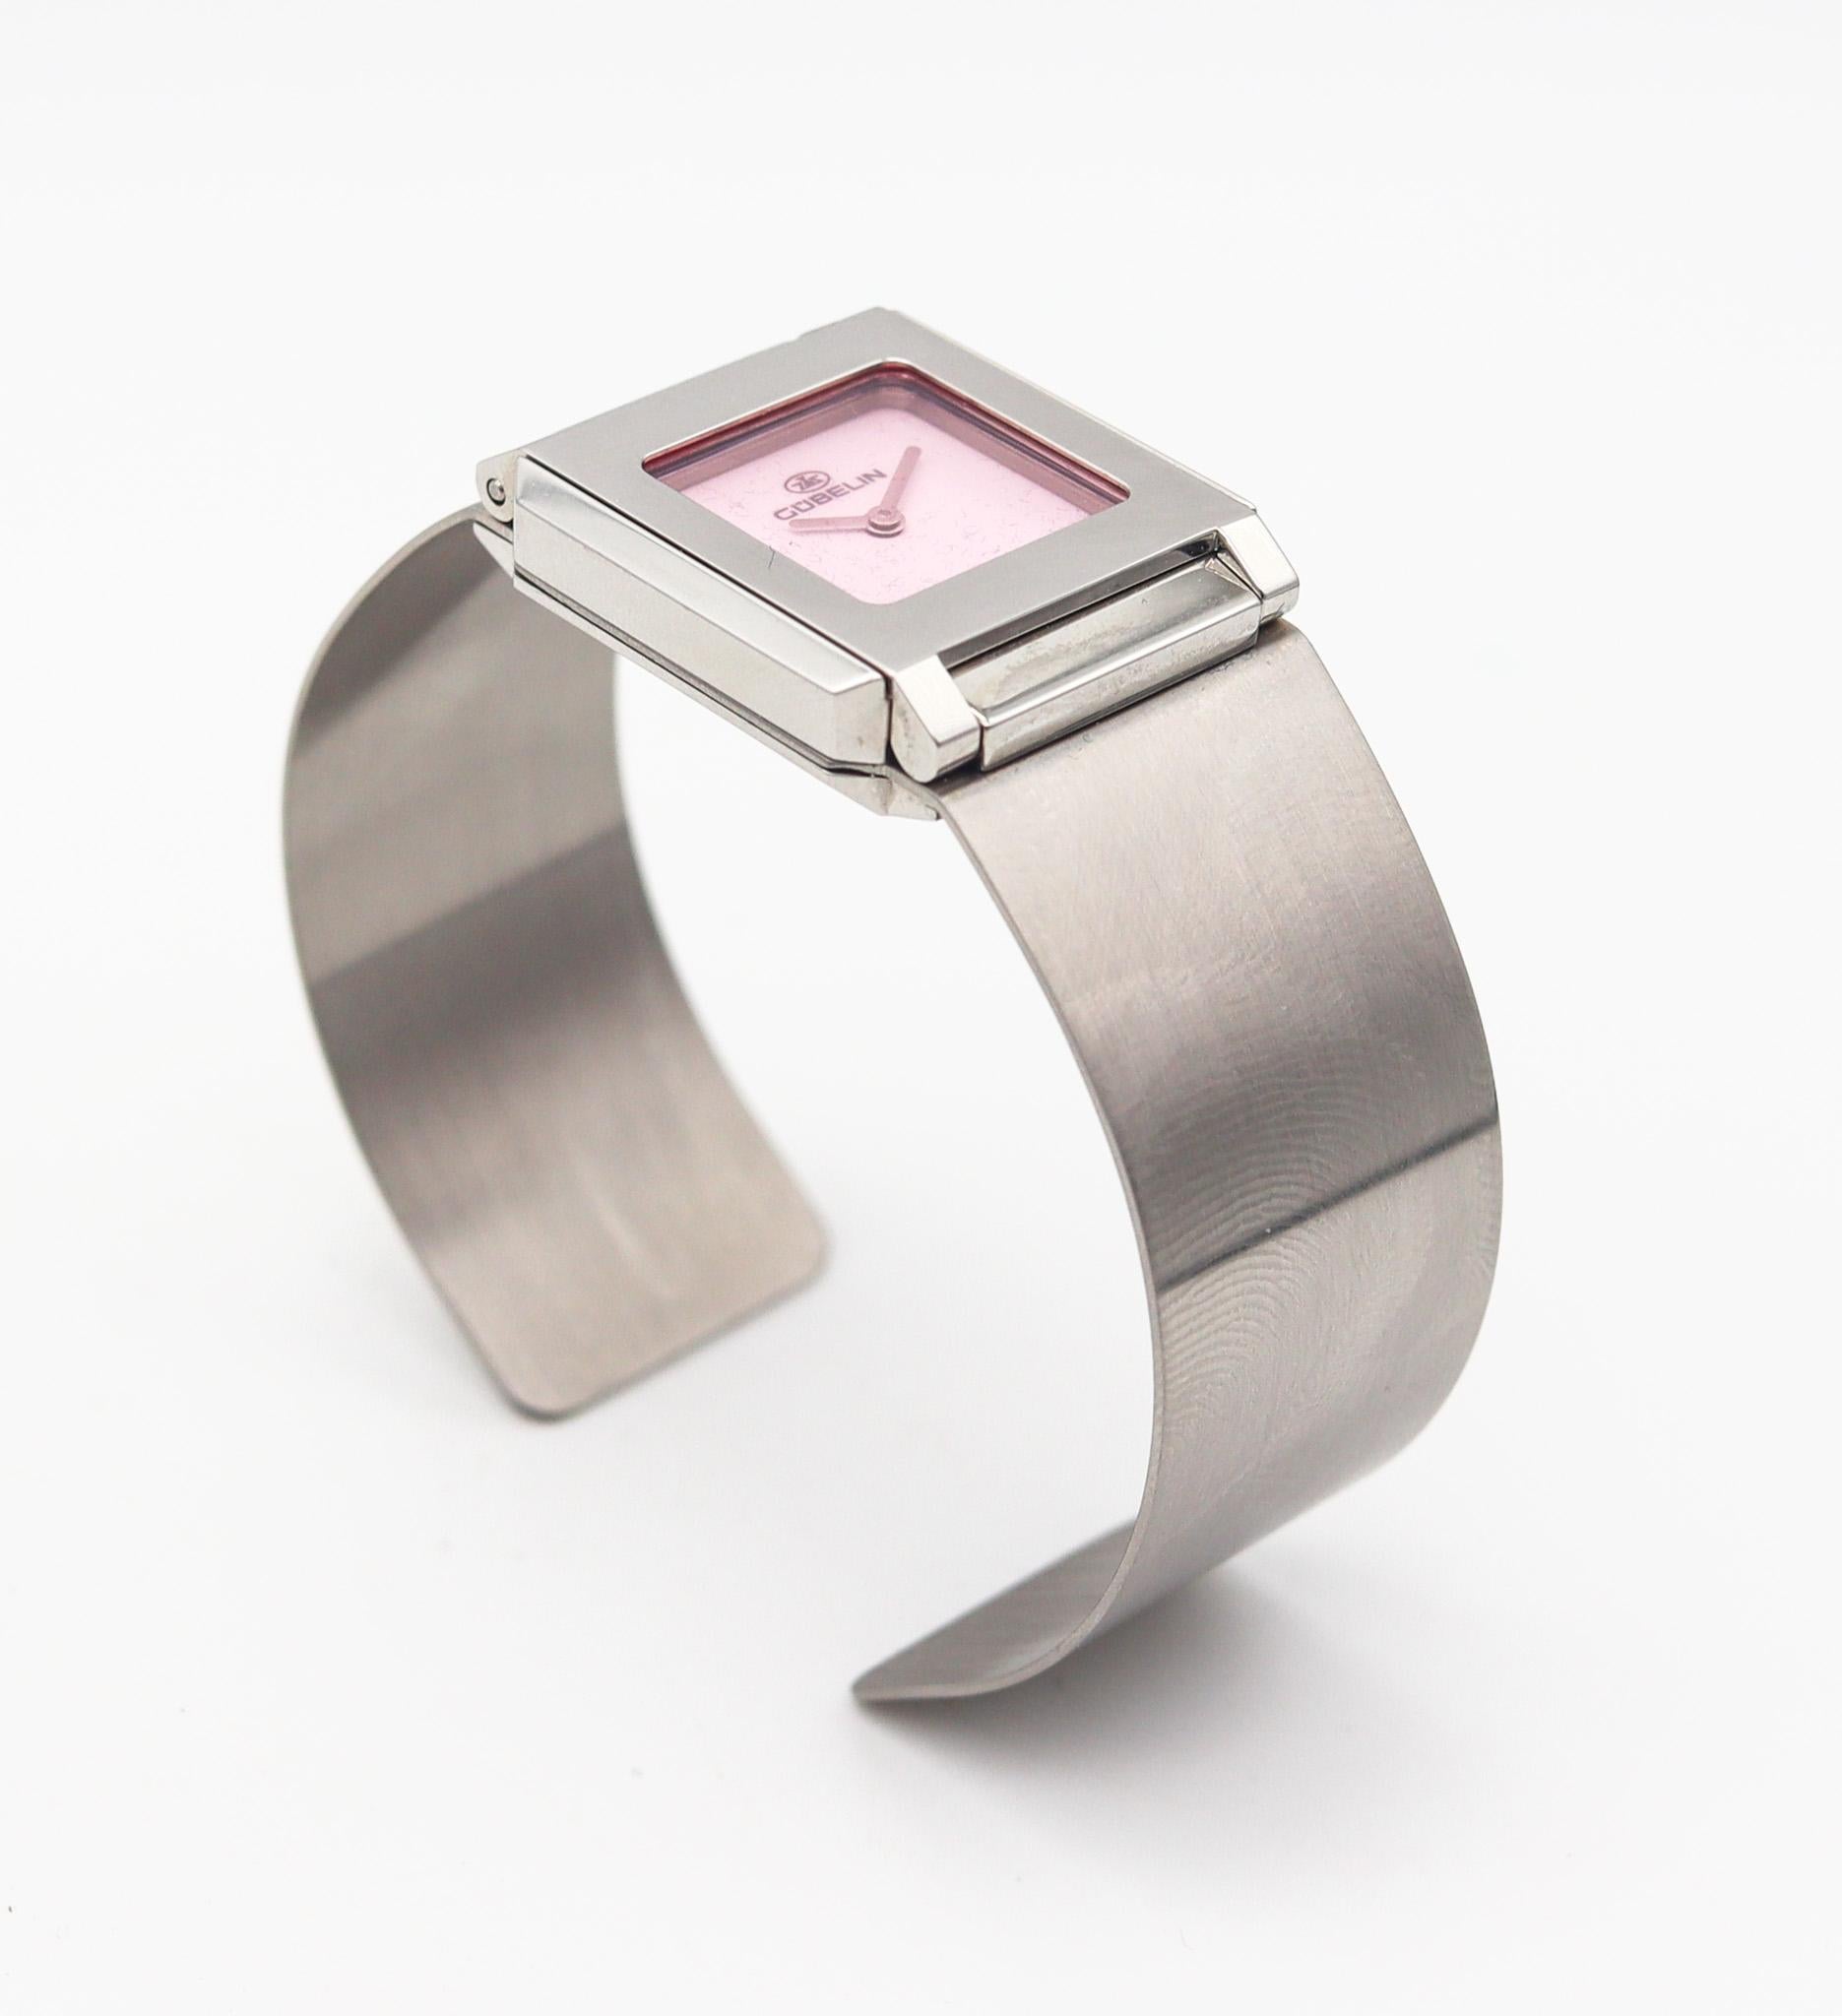 Gubelin Modernist Techno Cuff Bracelet Wrist Watch In Stainless Steel In Excellent Condition For Sale In Miami, FL